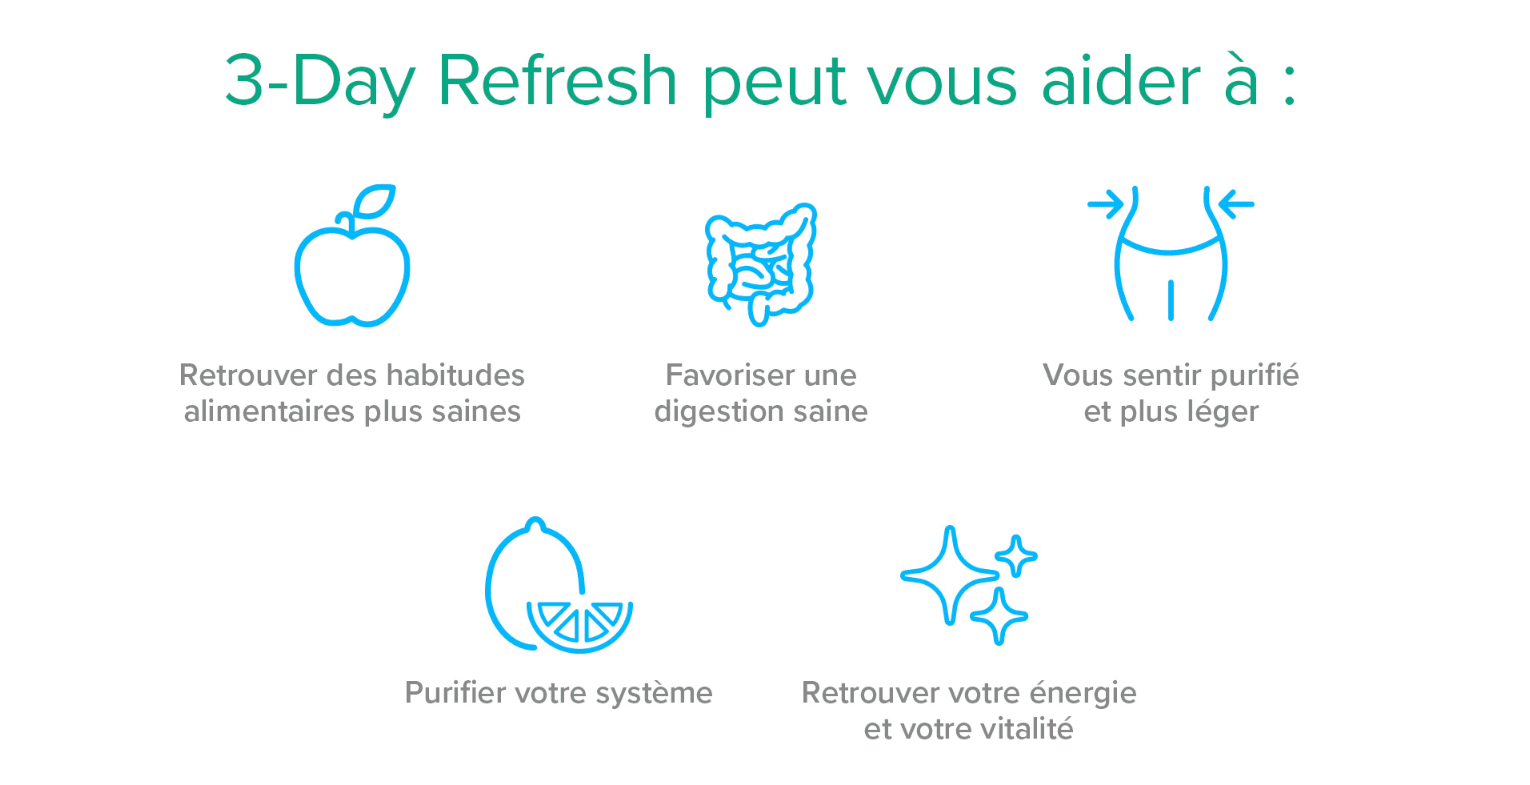 3 Day Refresh vous aide